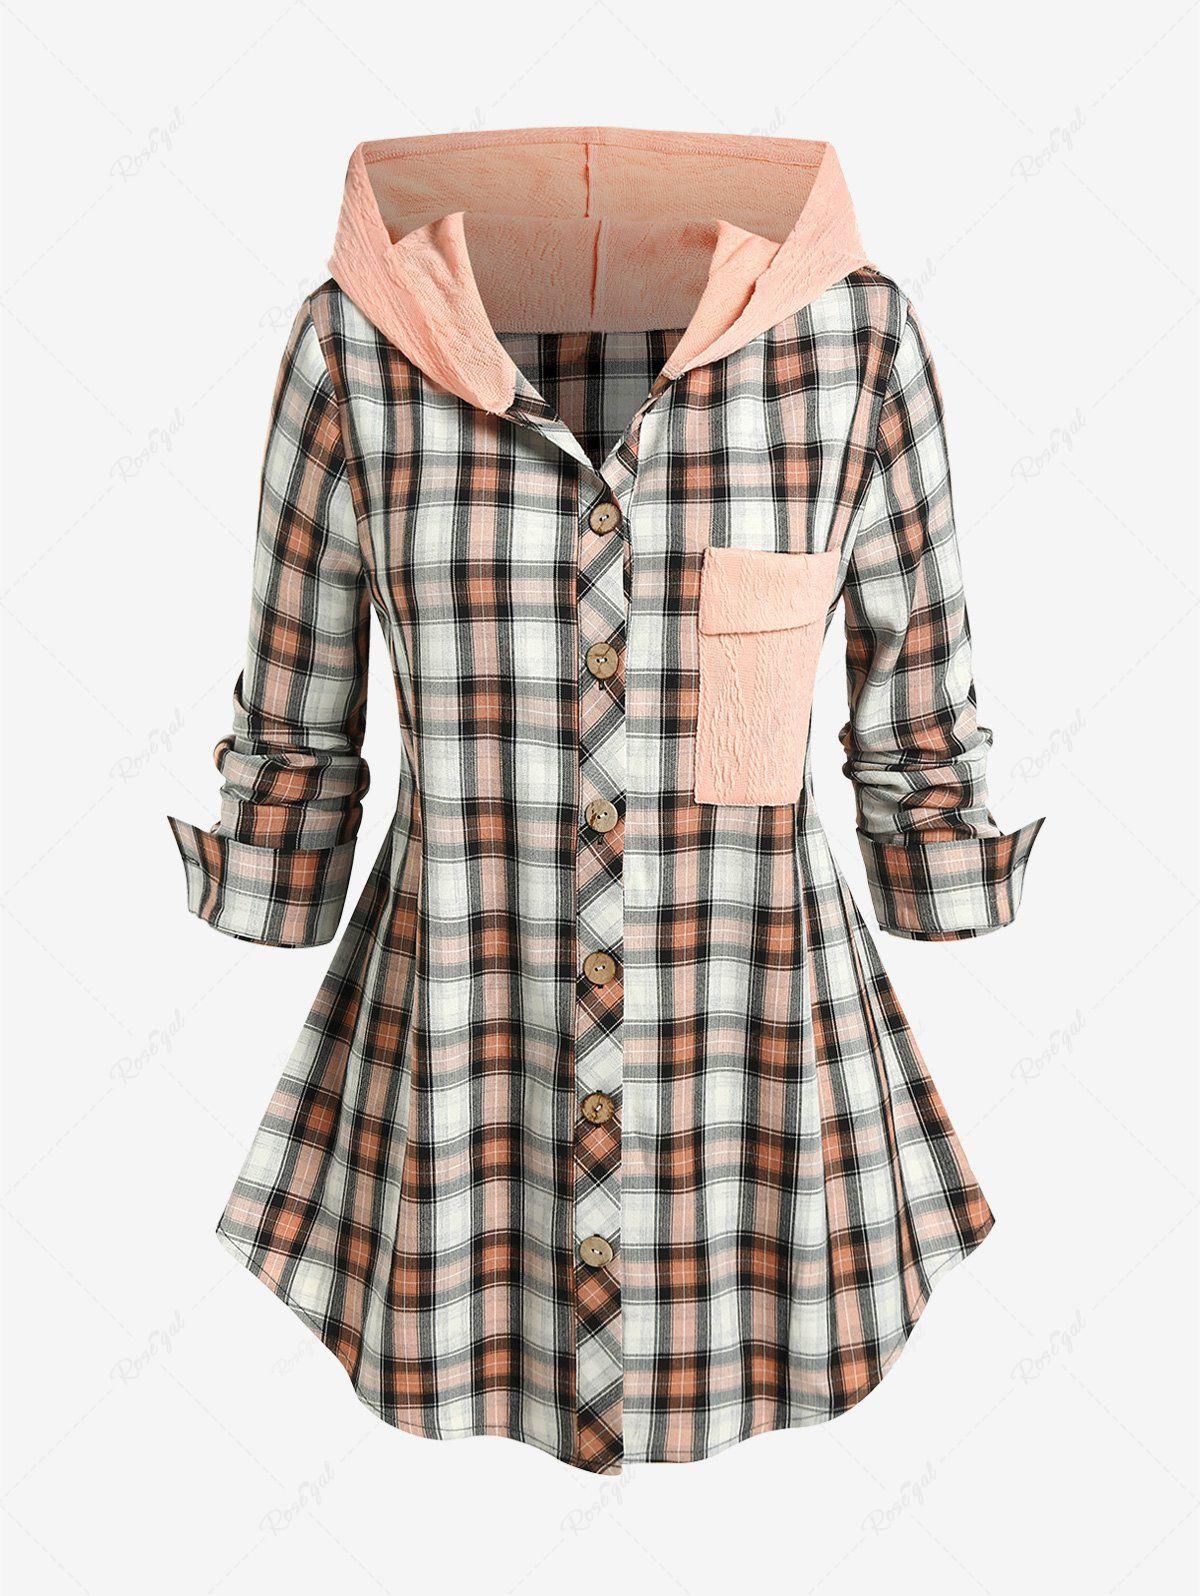 Plus Size Plaid Colorblock Textured Hooded Shirt with Pocket - L | Us 12